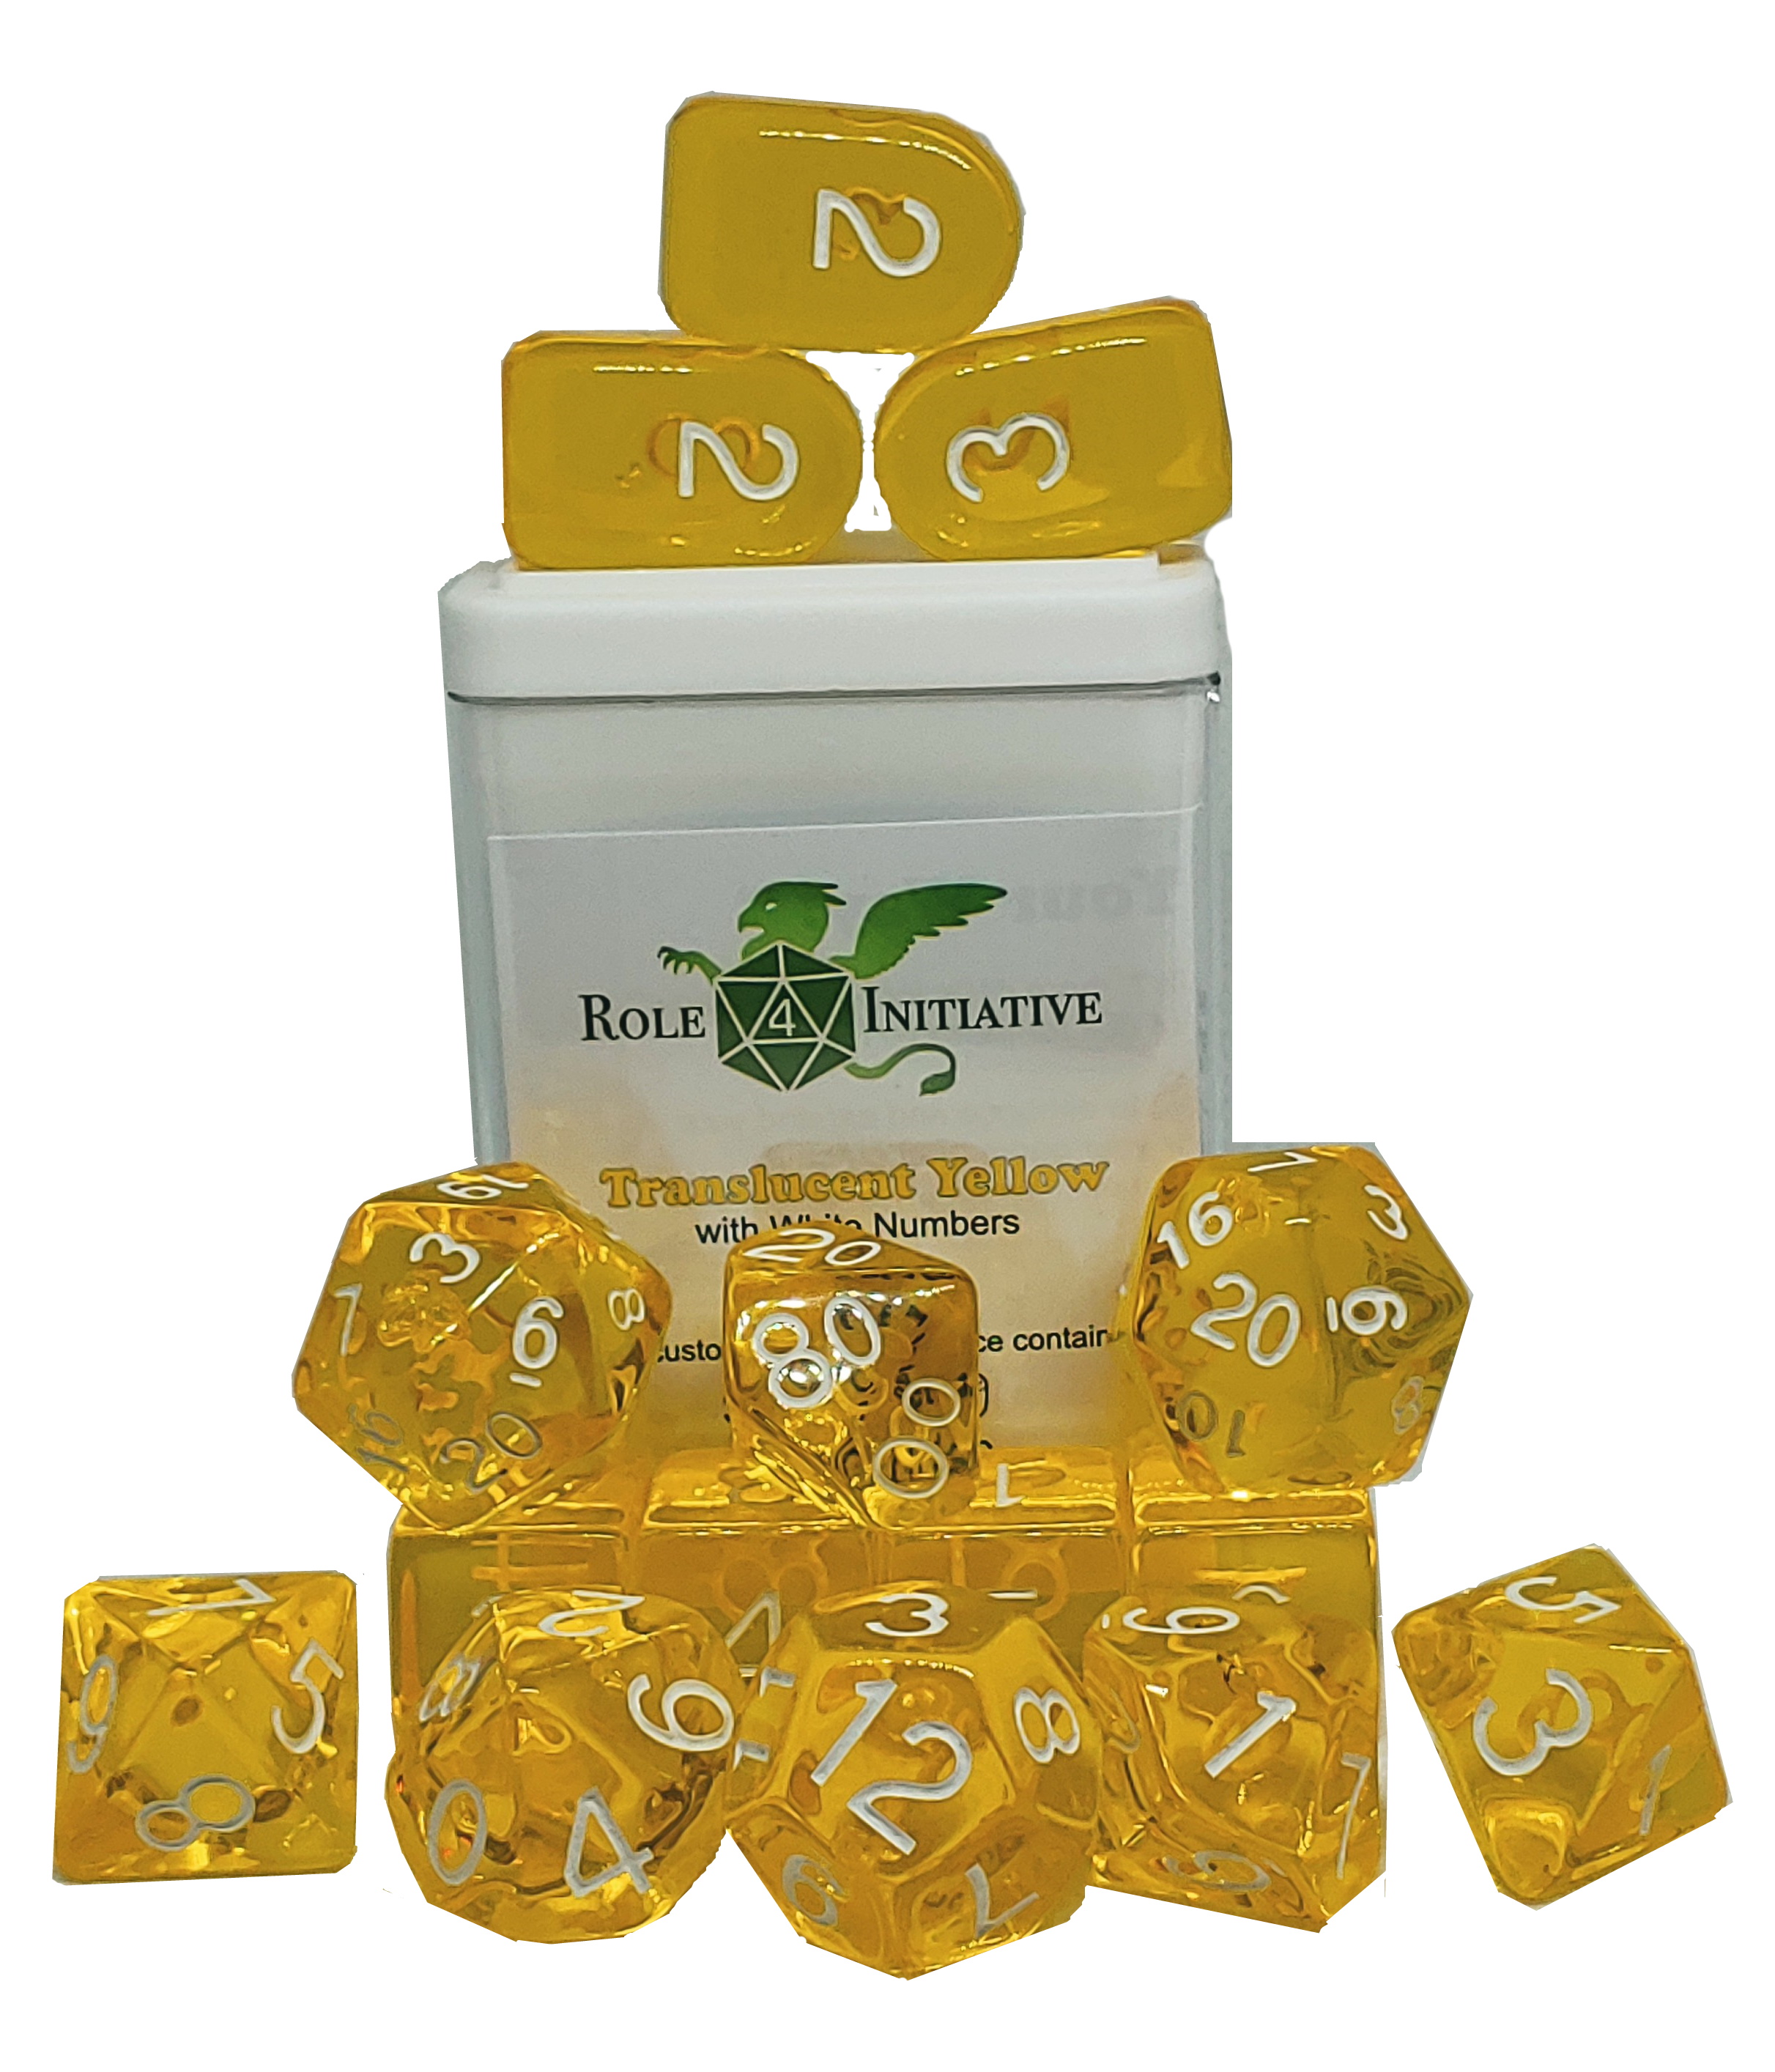 Role 4 Initiative: Polyhedral 15 Dice Set: Translucent Yellow And White Arch D4  [Damaged] 